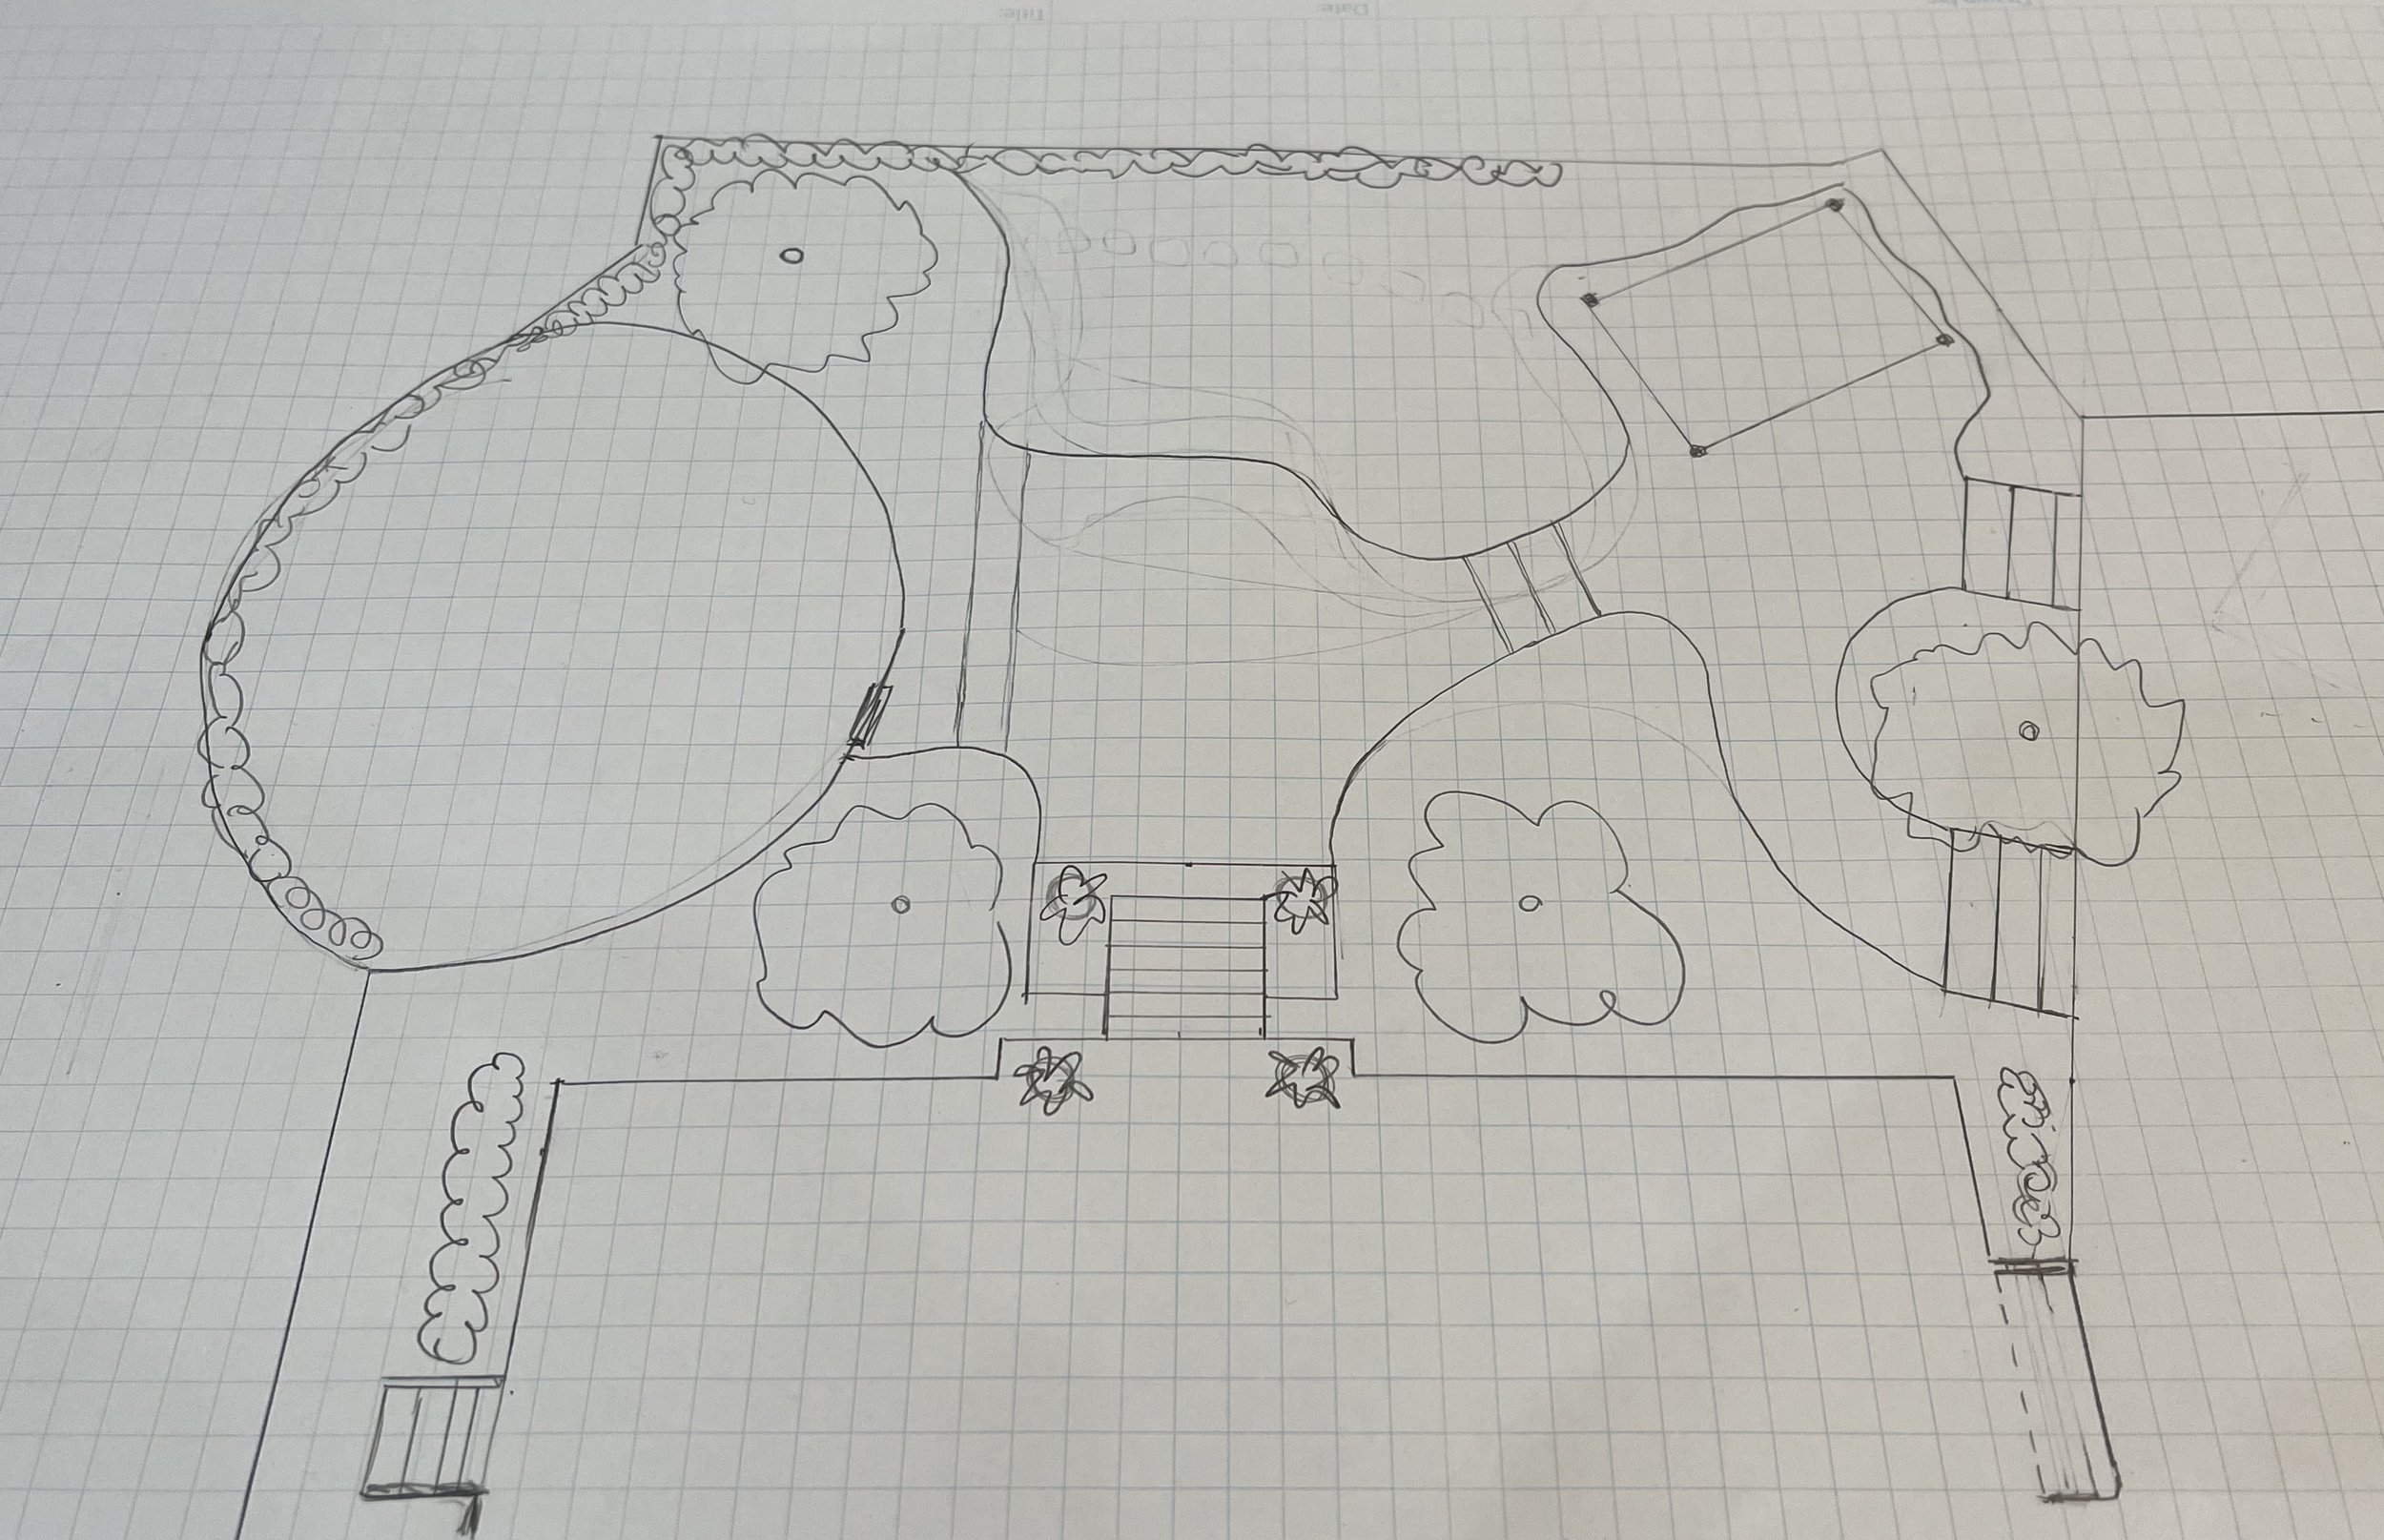  Hand drawn plan for an outdoor space with large open areas connected by stairs.  